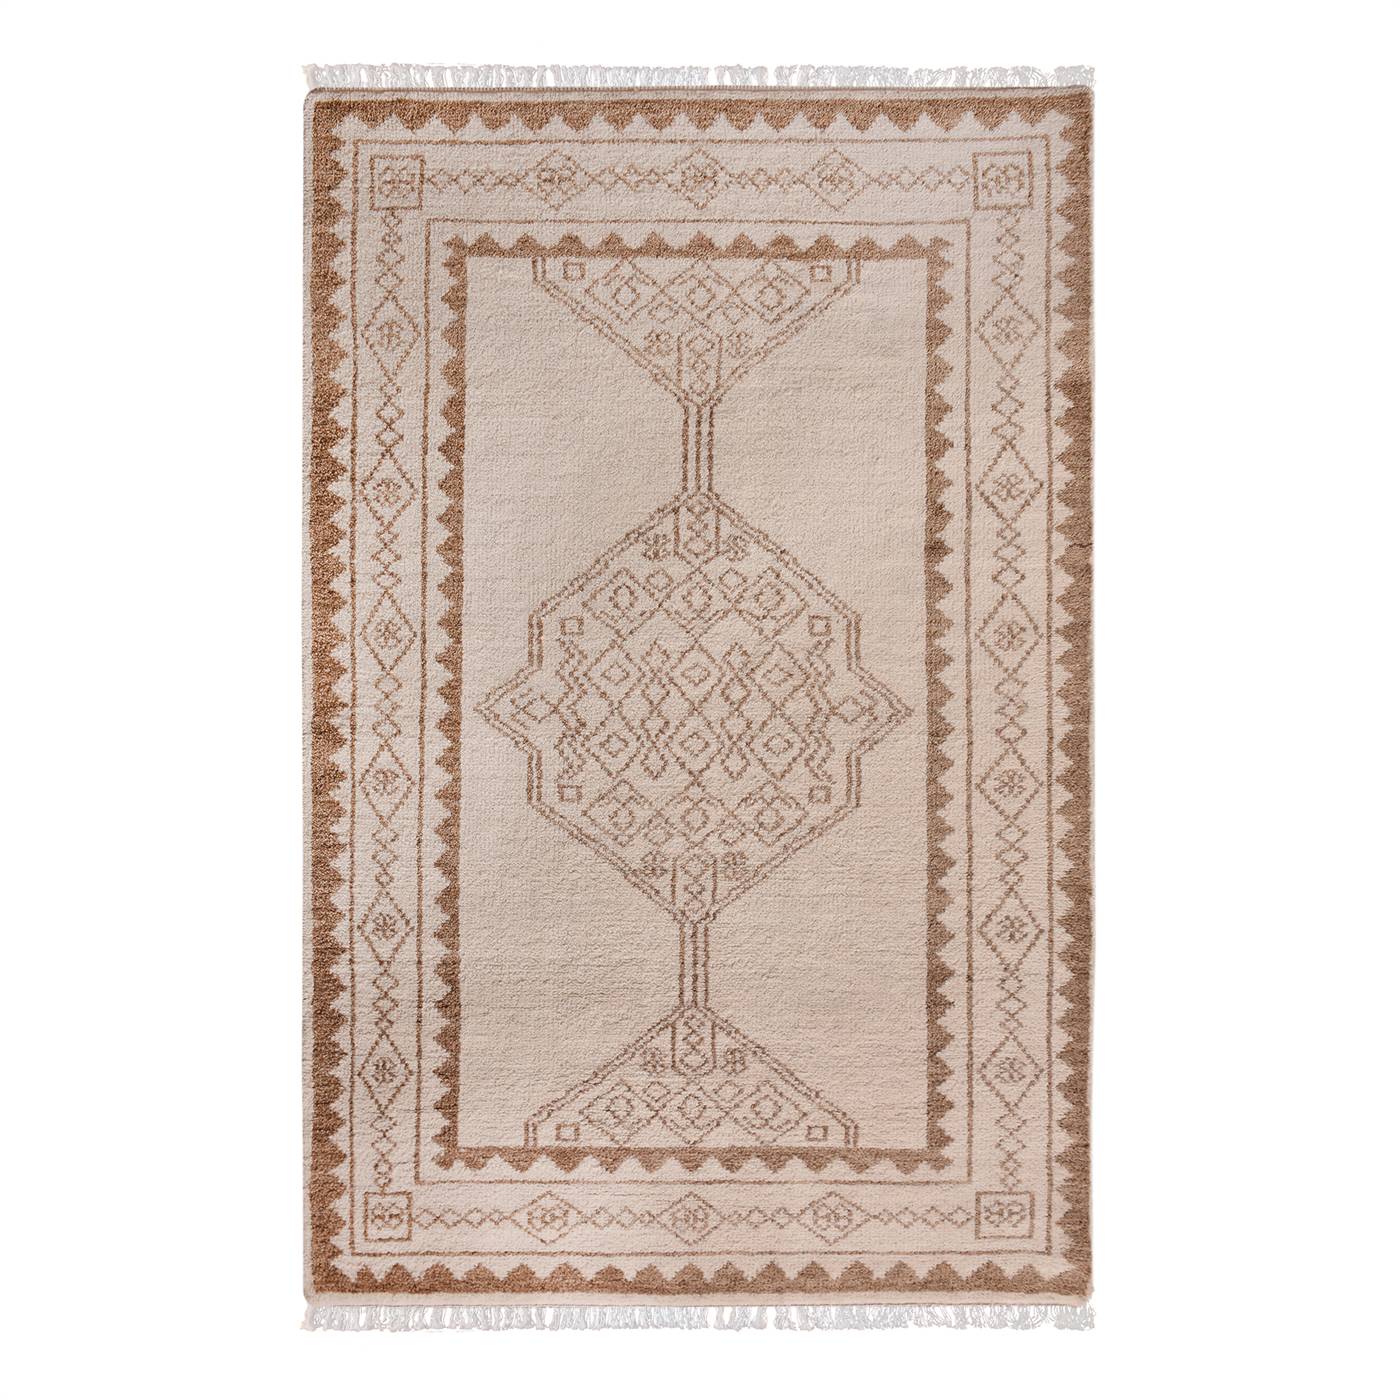 Area Rug, Bedroom Rug, Living Room Rug, Living Area Rug, Indian Rug, Office Carpet, Office Rug, Shop Rug Online, Natural White, Brown , Nz Wool , Hand Knotted , Handknotted, All Cut, Intricate 